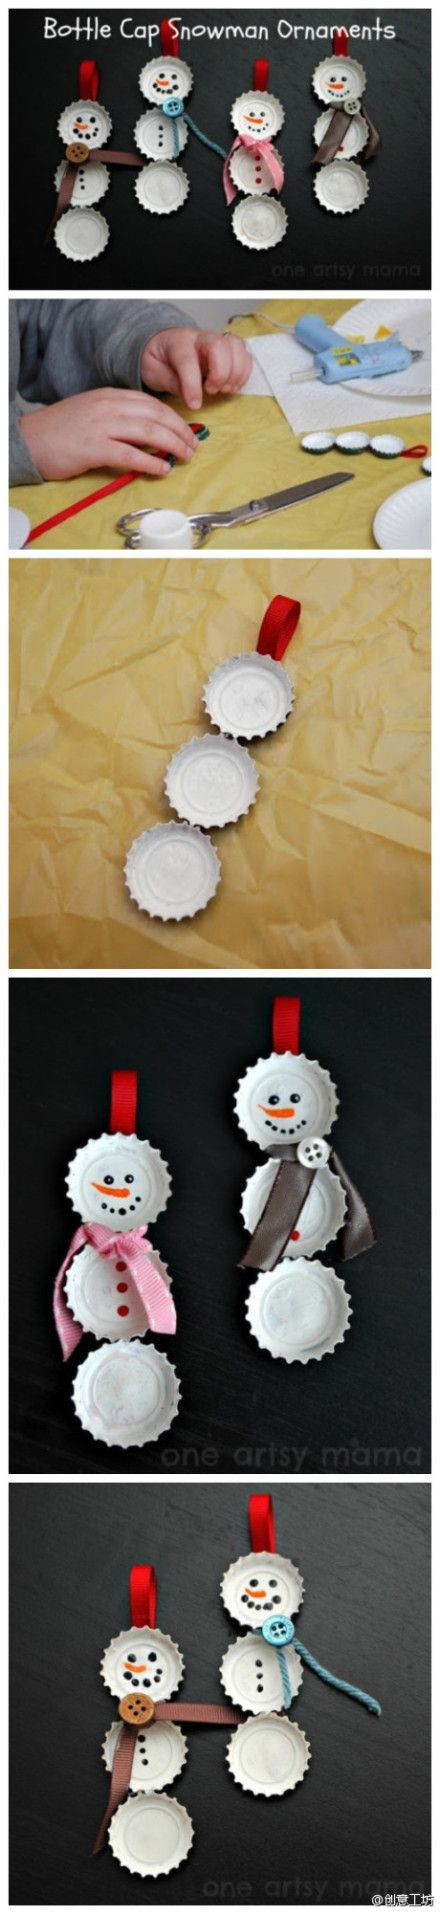 Cool Christmas Crafts
 Cool Christmas Crafts Paper Crafts for Teens paper